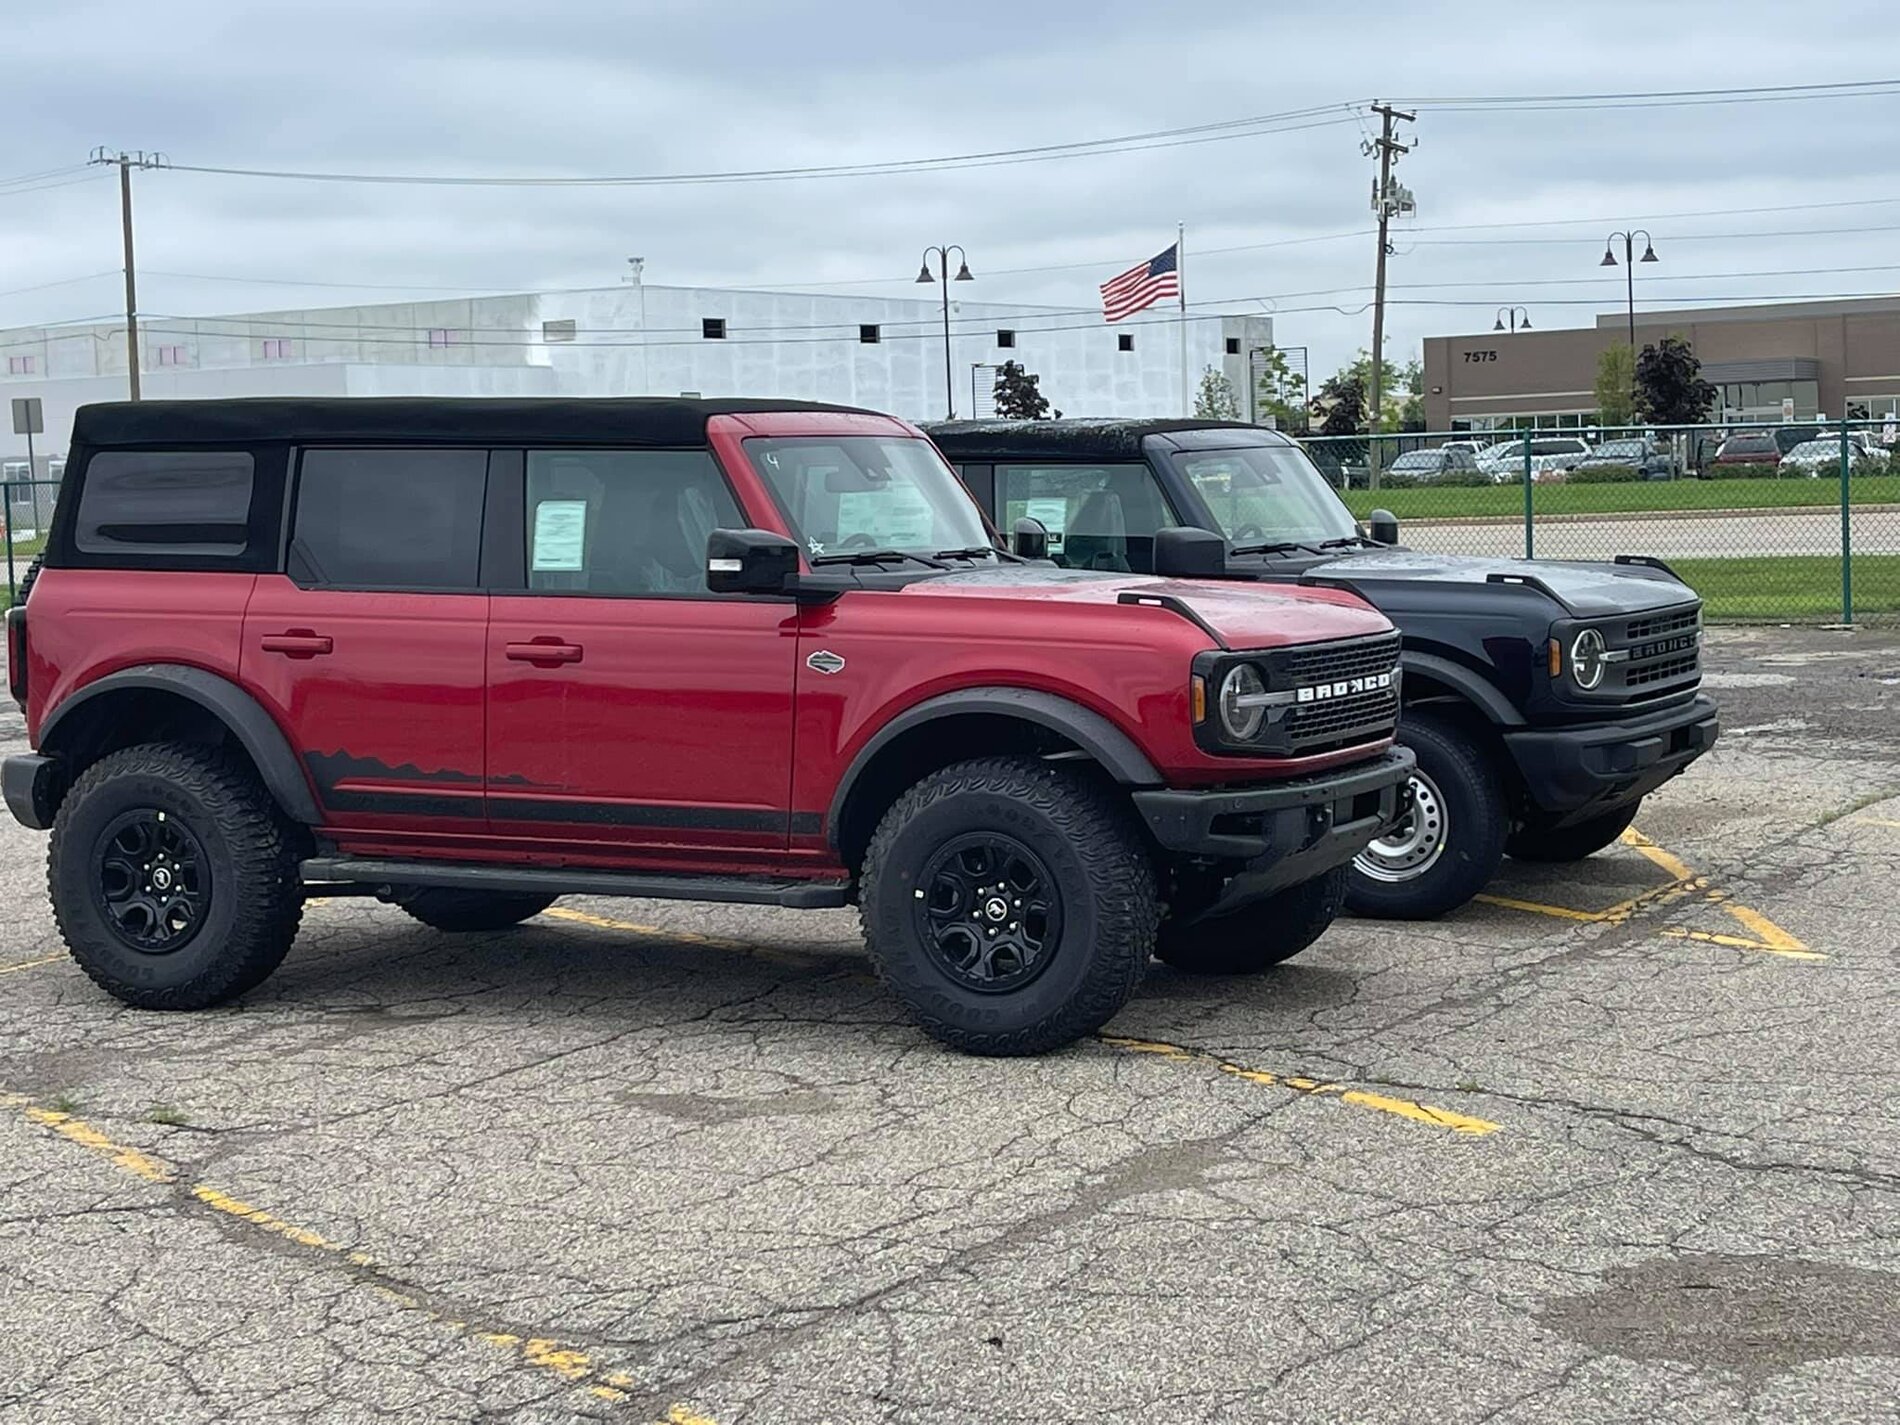 Ford Bronco Wildtrak vs Base Bronco 4-Door Side-by-Side Shows Height and Equipment Difference 2021 Bronco -- Rapid Red Wildtrak + Shadow Black Base 4-Doors 2